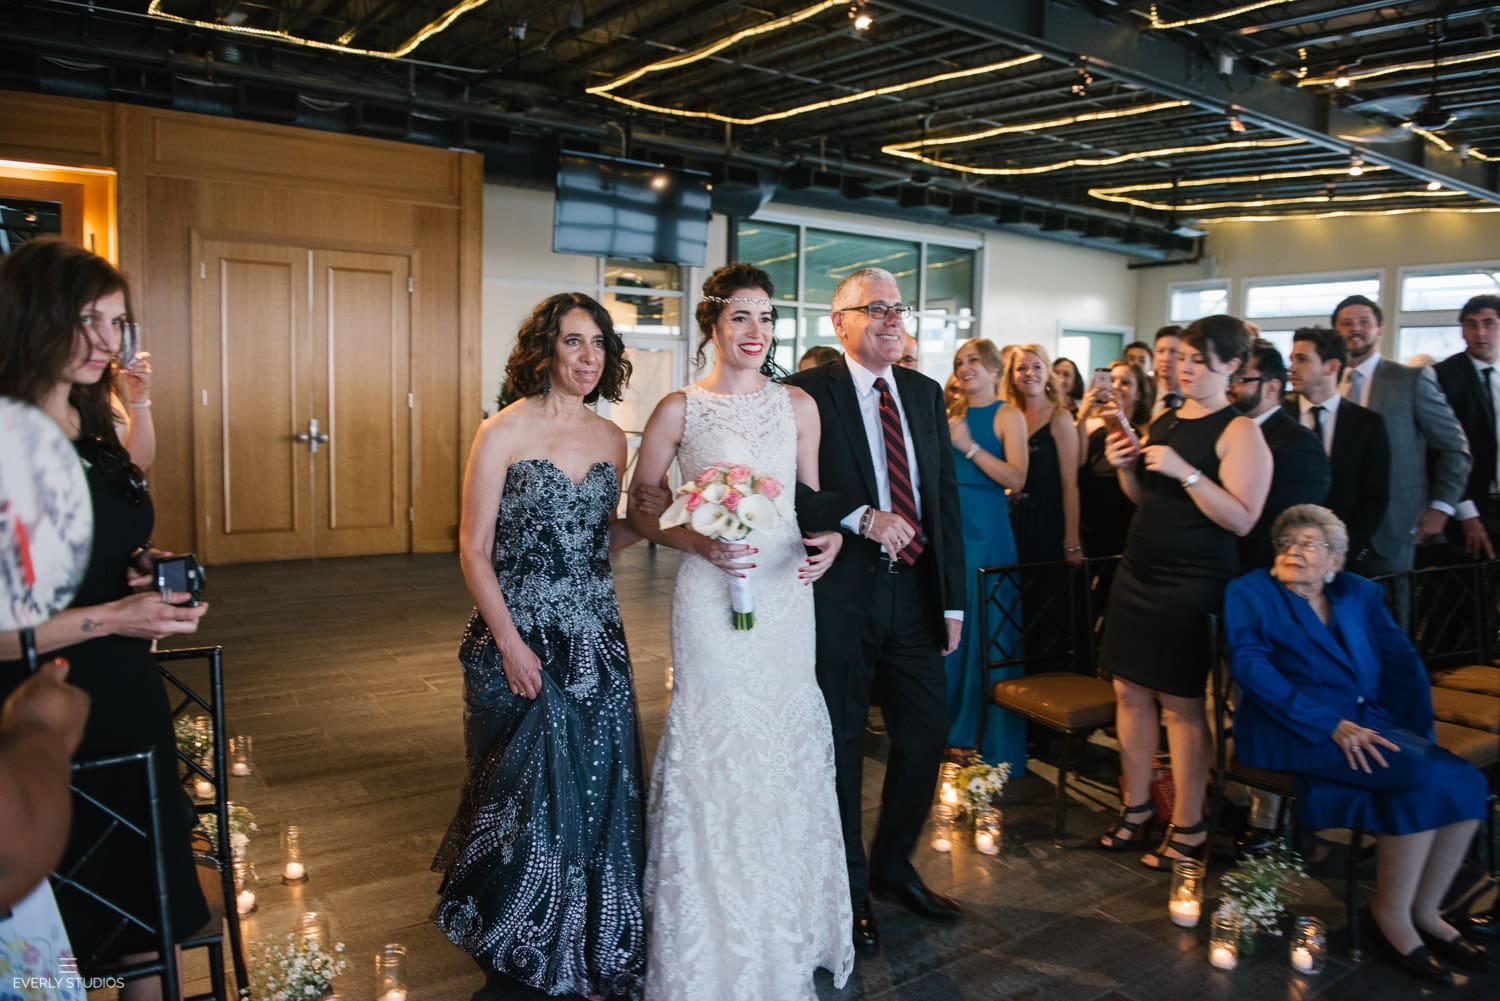 Chelsea Piers Sunset Terrace wedding on the Hudson River in NYC